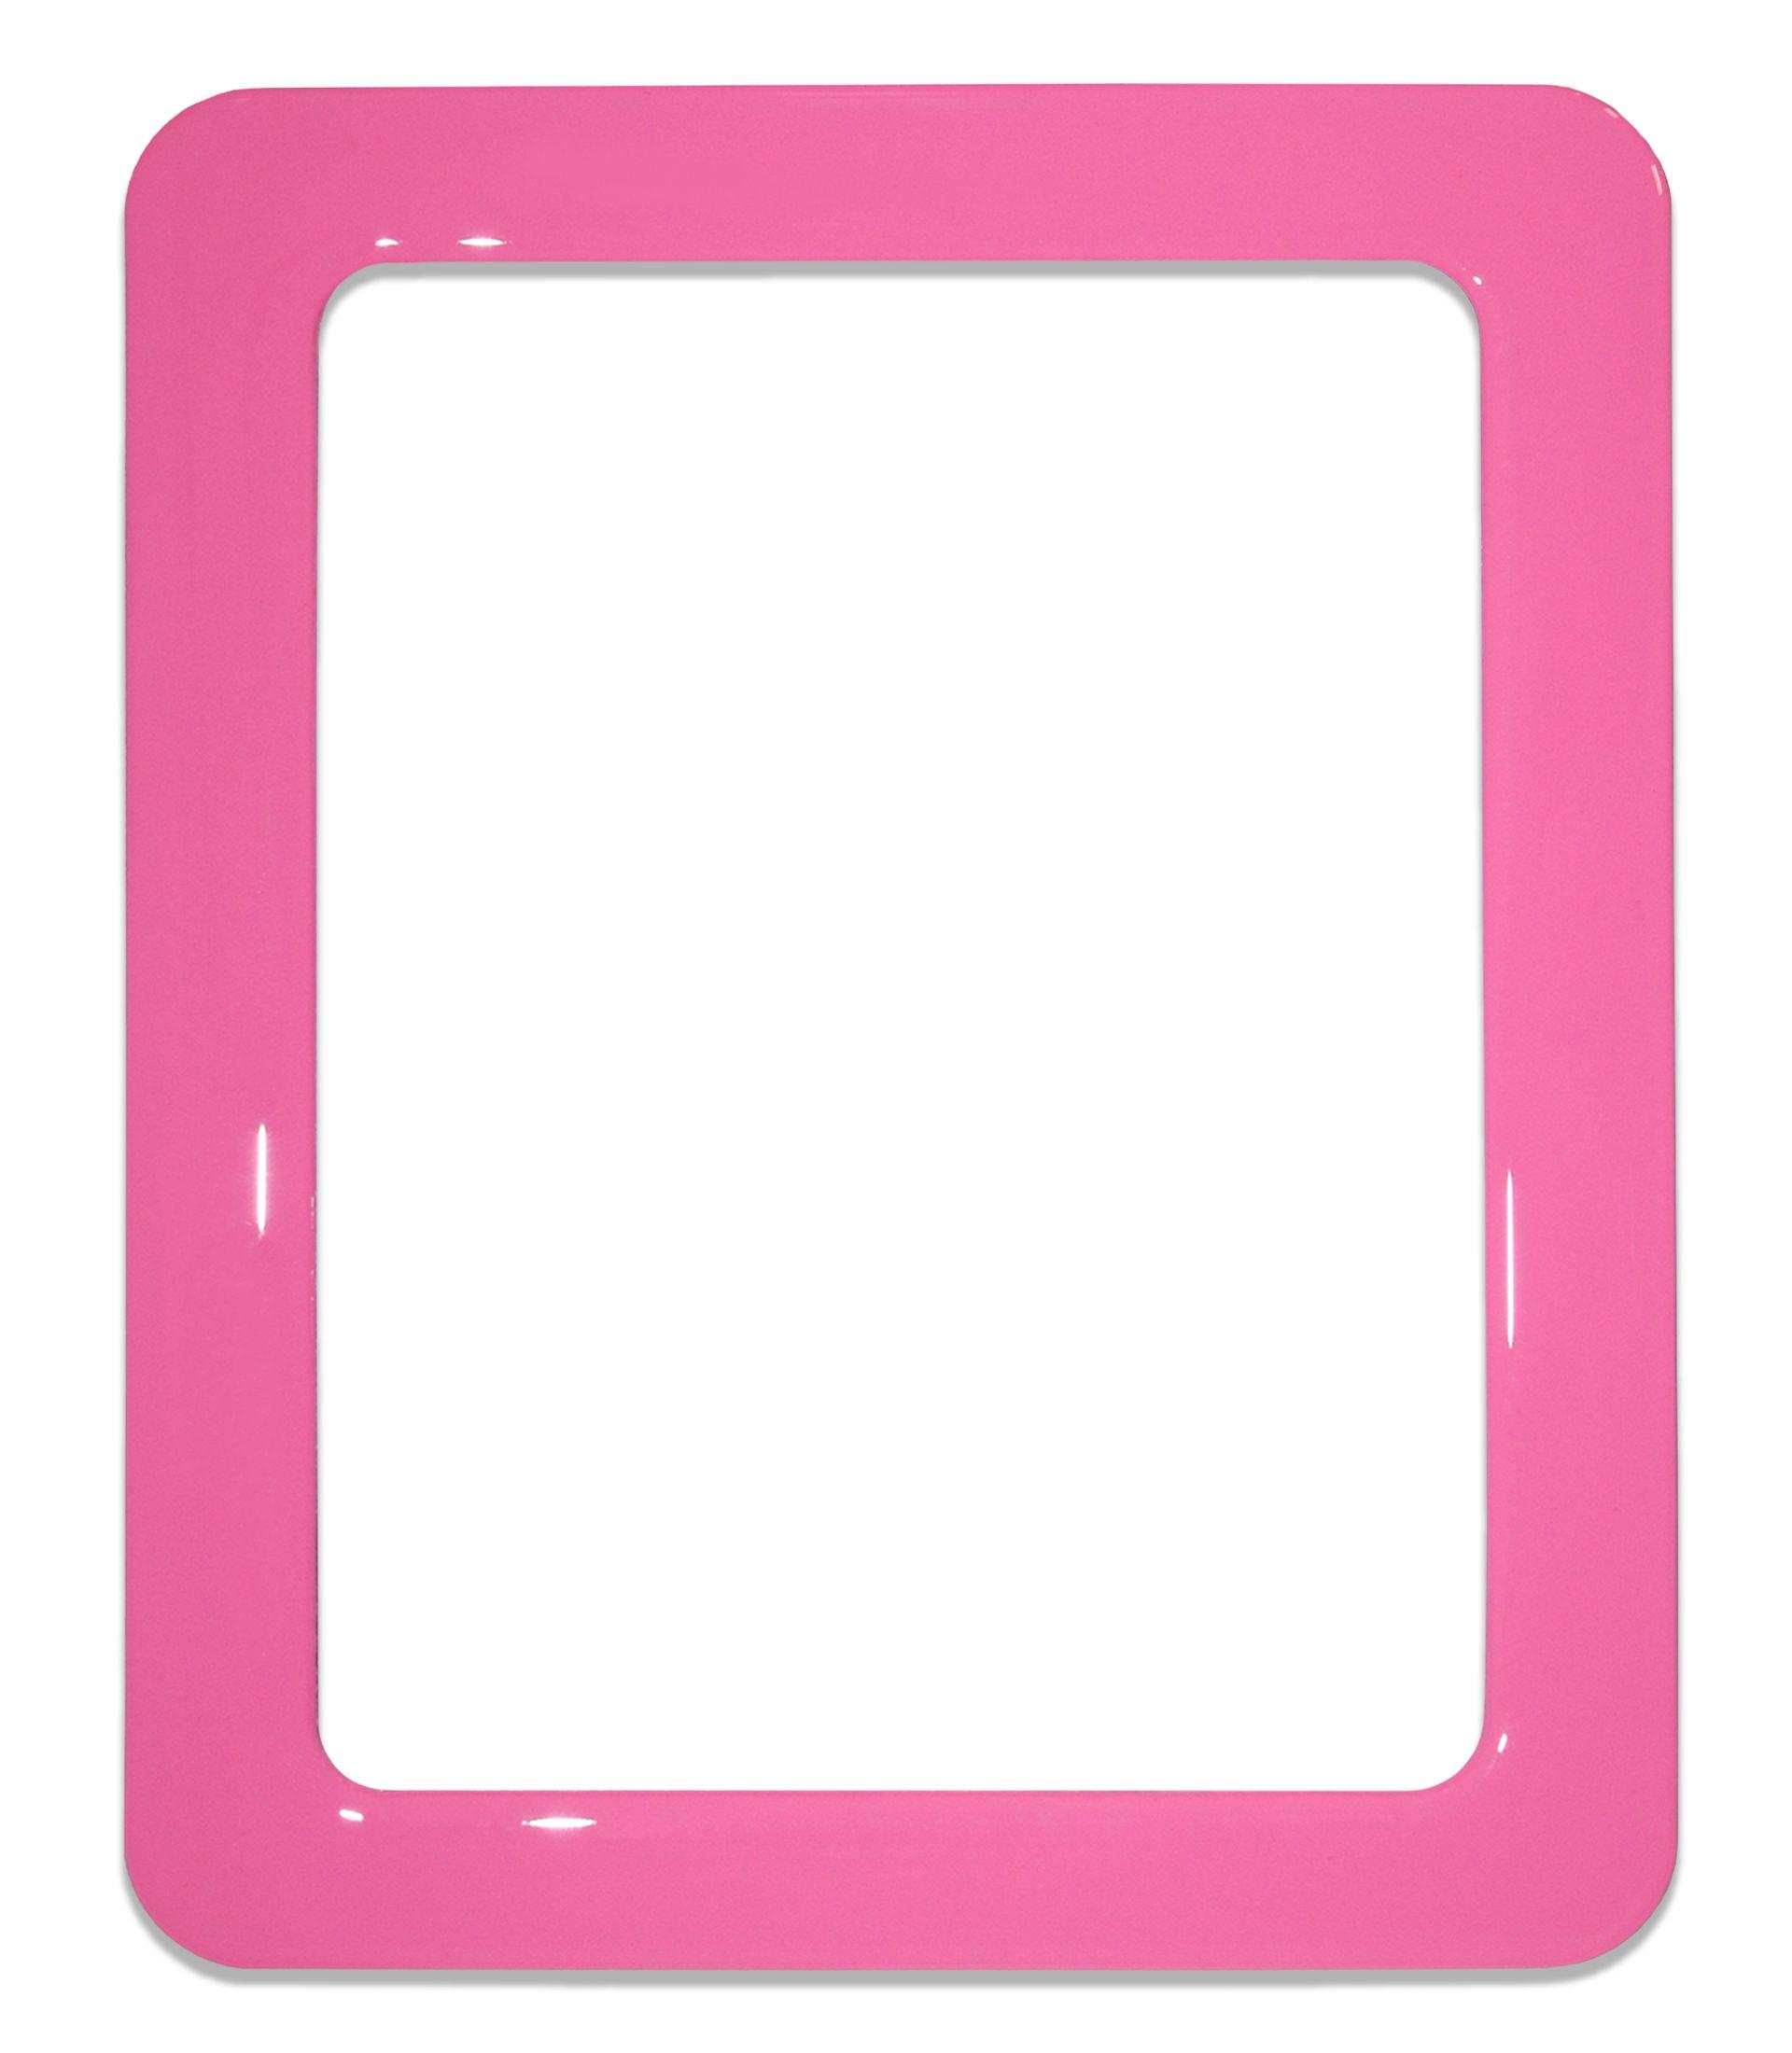 Magnetic self-adhesive frame size 19.0 x 23.8 cm - pink